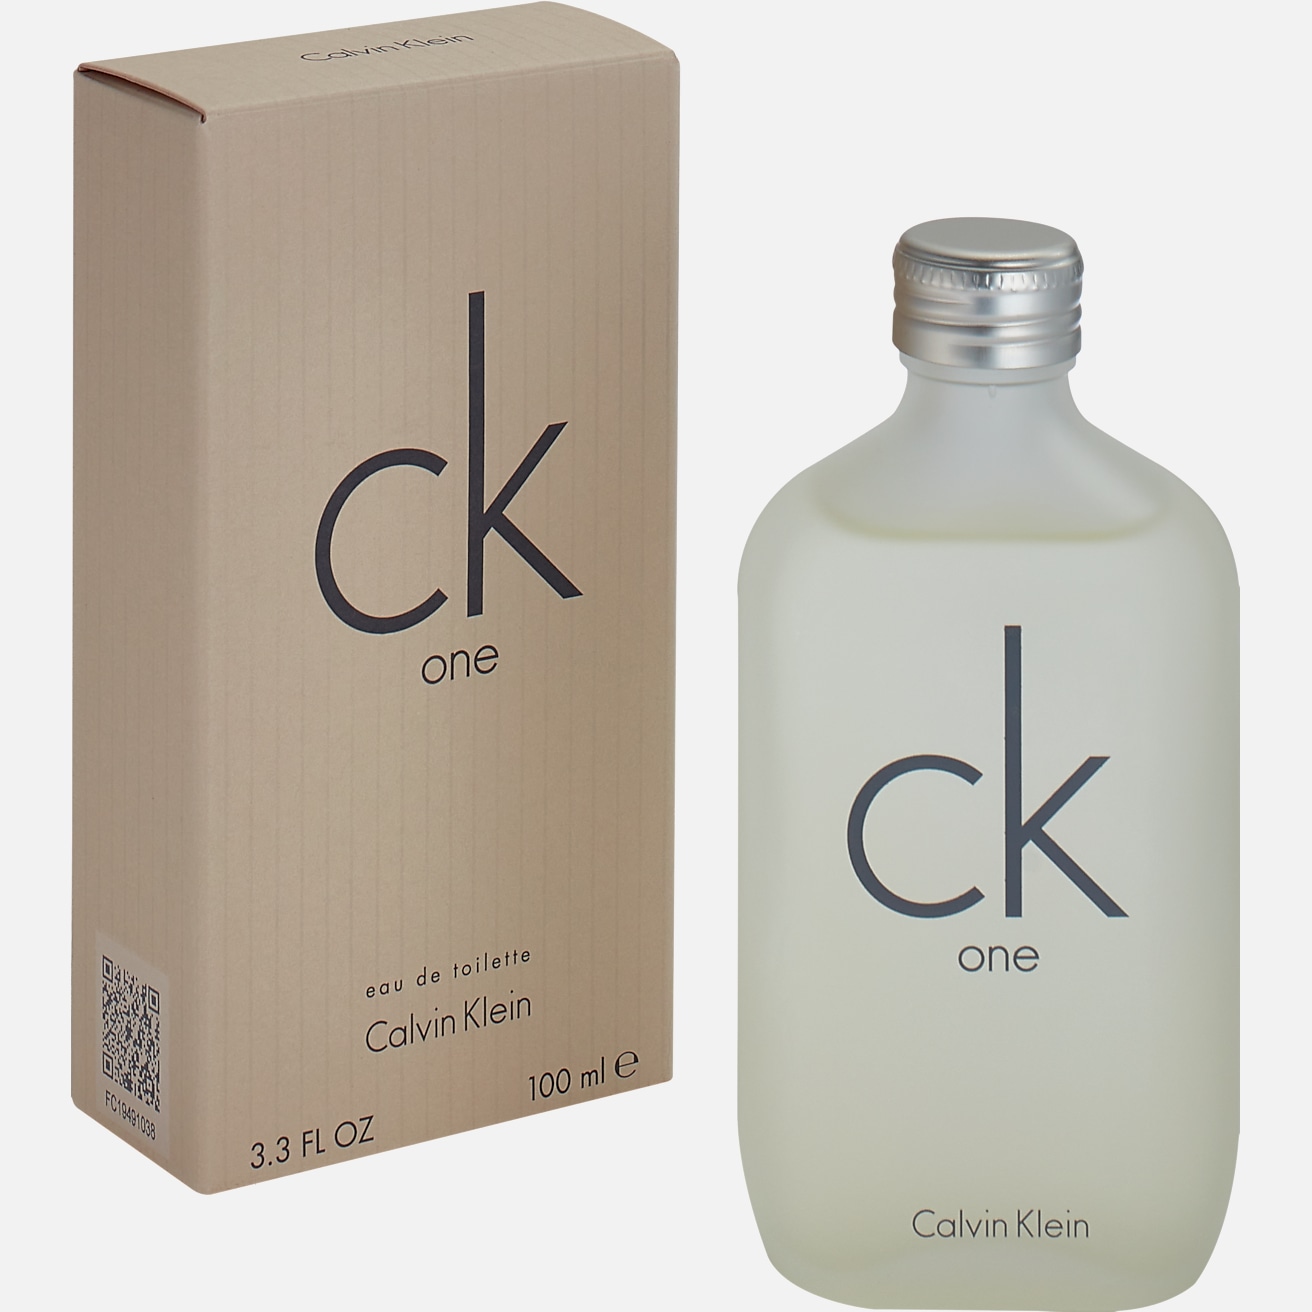 https://image.menswearhouse.com/is/image/TMW/TMW_8WZP_00_CALVIN_KLEIN_FRAGRANCES_MISC_MAIN?imPolicy=pdp-mob-2x